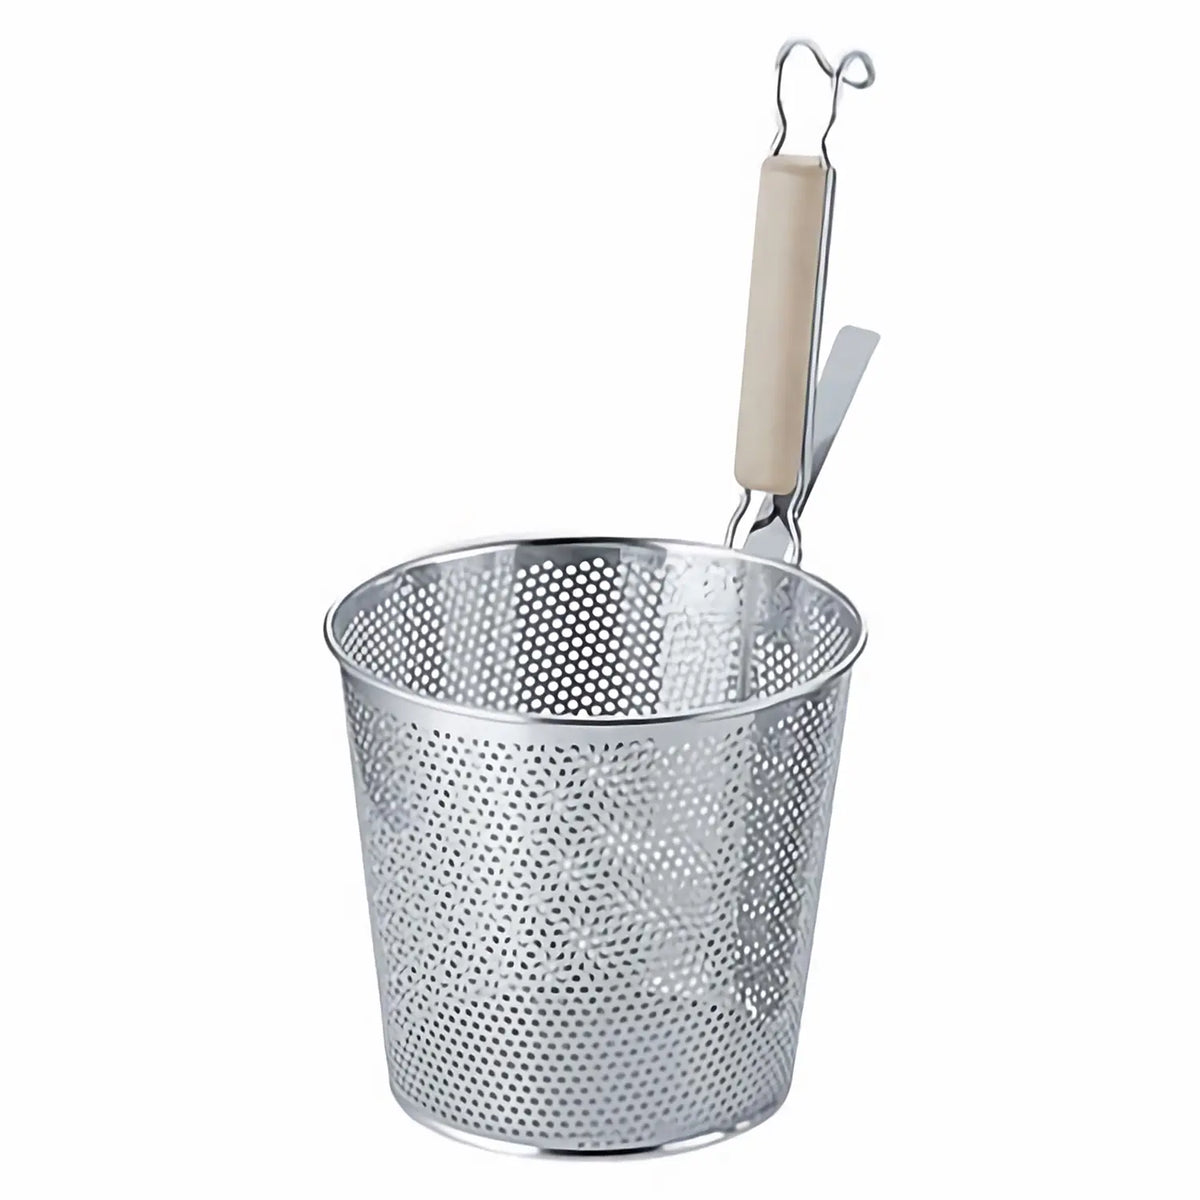 YUKIWA Stainless Steel Perforated Udon Tebo Noodle Strainer Flat Base with Wooden Handle